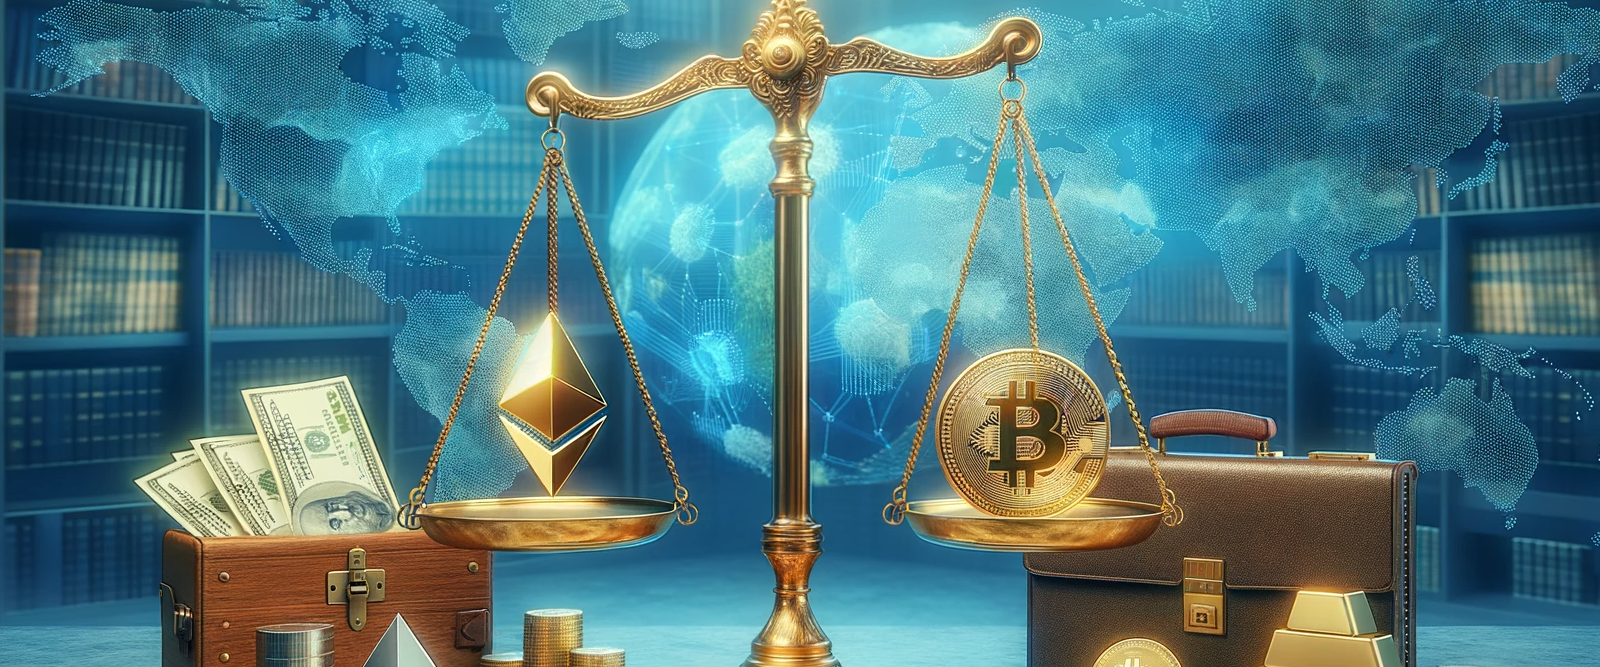 Realistic golden scale of justice, perfectly balanced in the center of the image. On the left plate of the scale are finely detailed representations of traditional finance: crisp dollar bills, shining gold bars, and a sophisticated leather briefcase. On the right plate, symbols of the blockchain world are displayed: a 3D-rendered Bitcoin, a tangible Ethereum coin with its iconic logo, and a luminous digital cube. In the background, a soft, semi-transparent world map overlays, symbolizing the global implications of finance. The composition is set against a modern blue hue, encapsulating the harmonious blend of the old and new financial worlds.